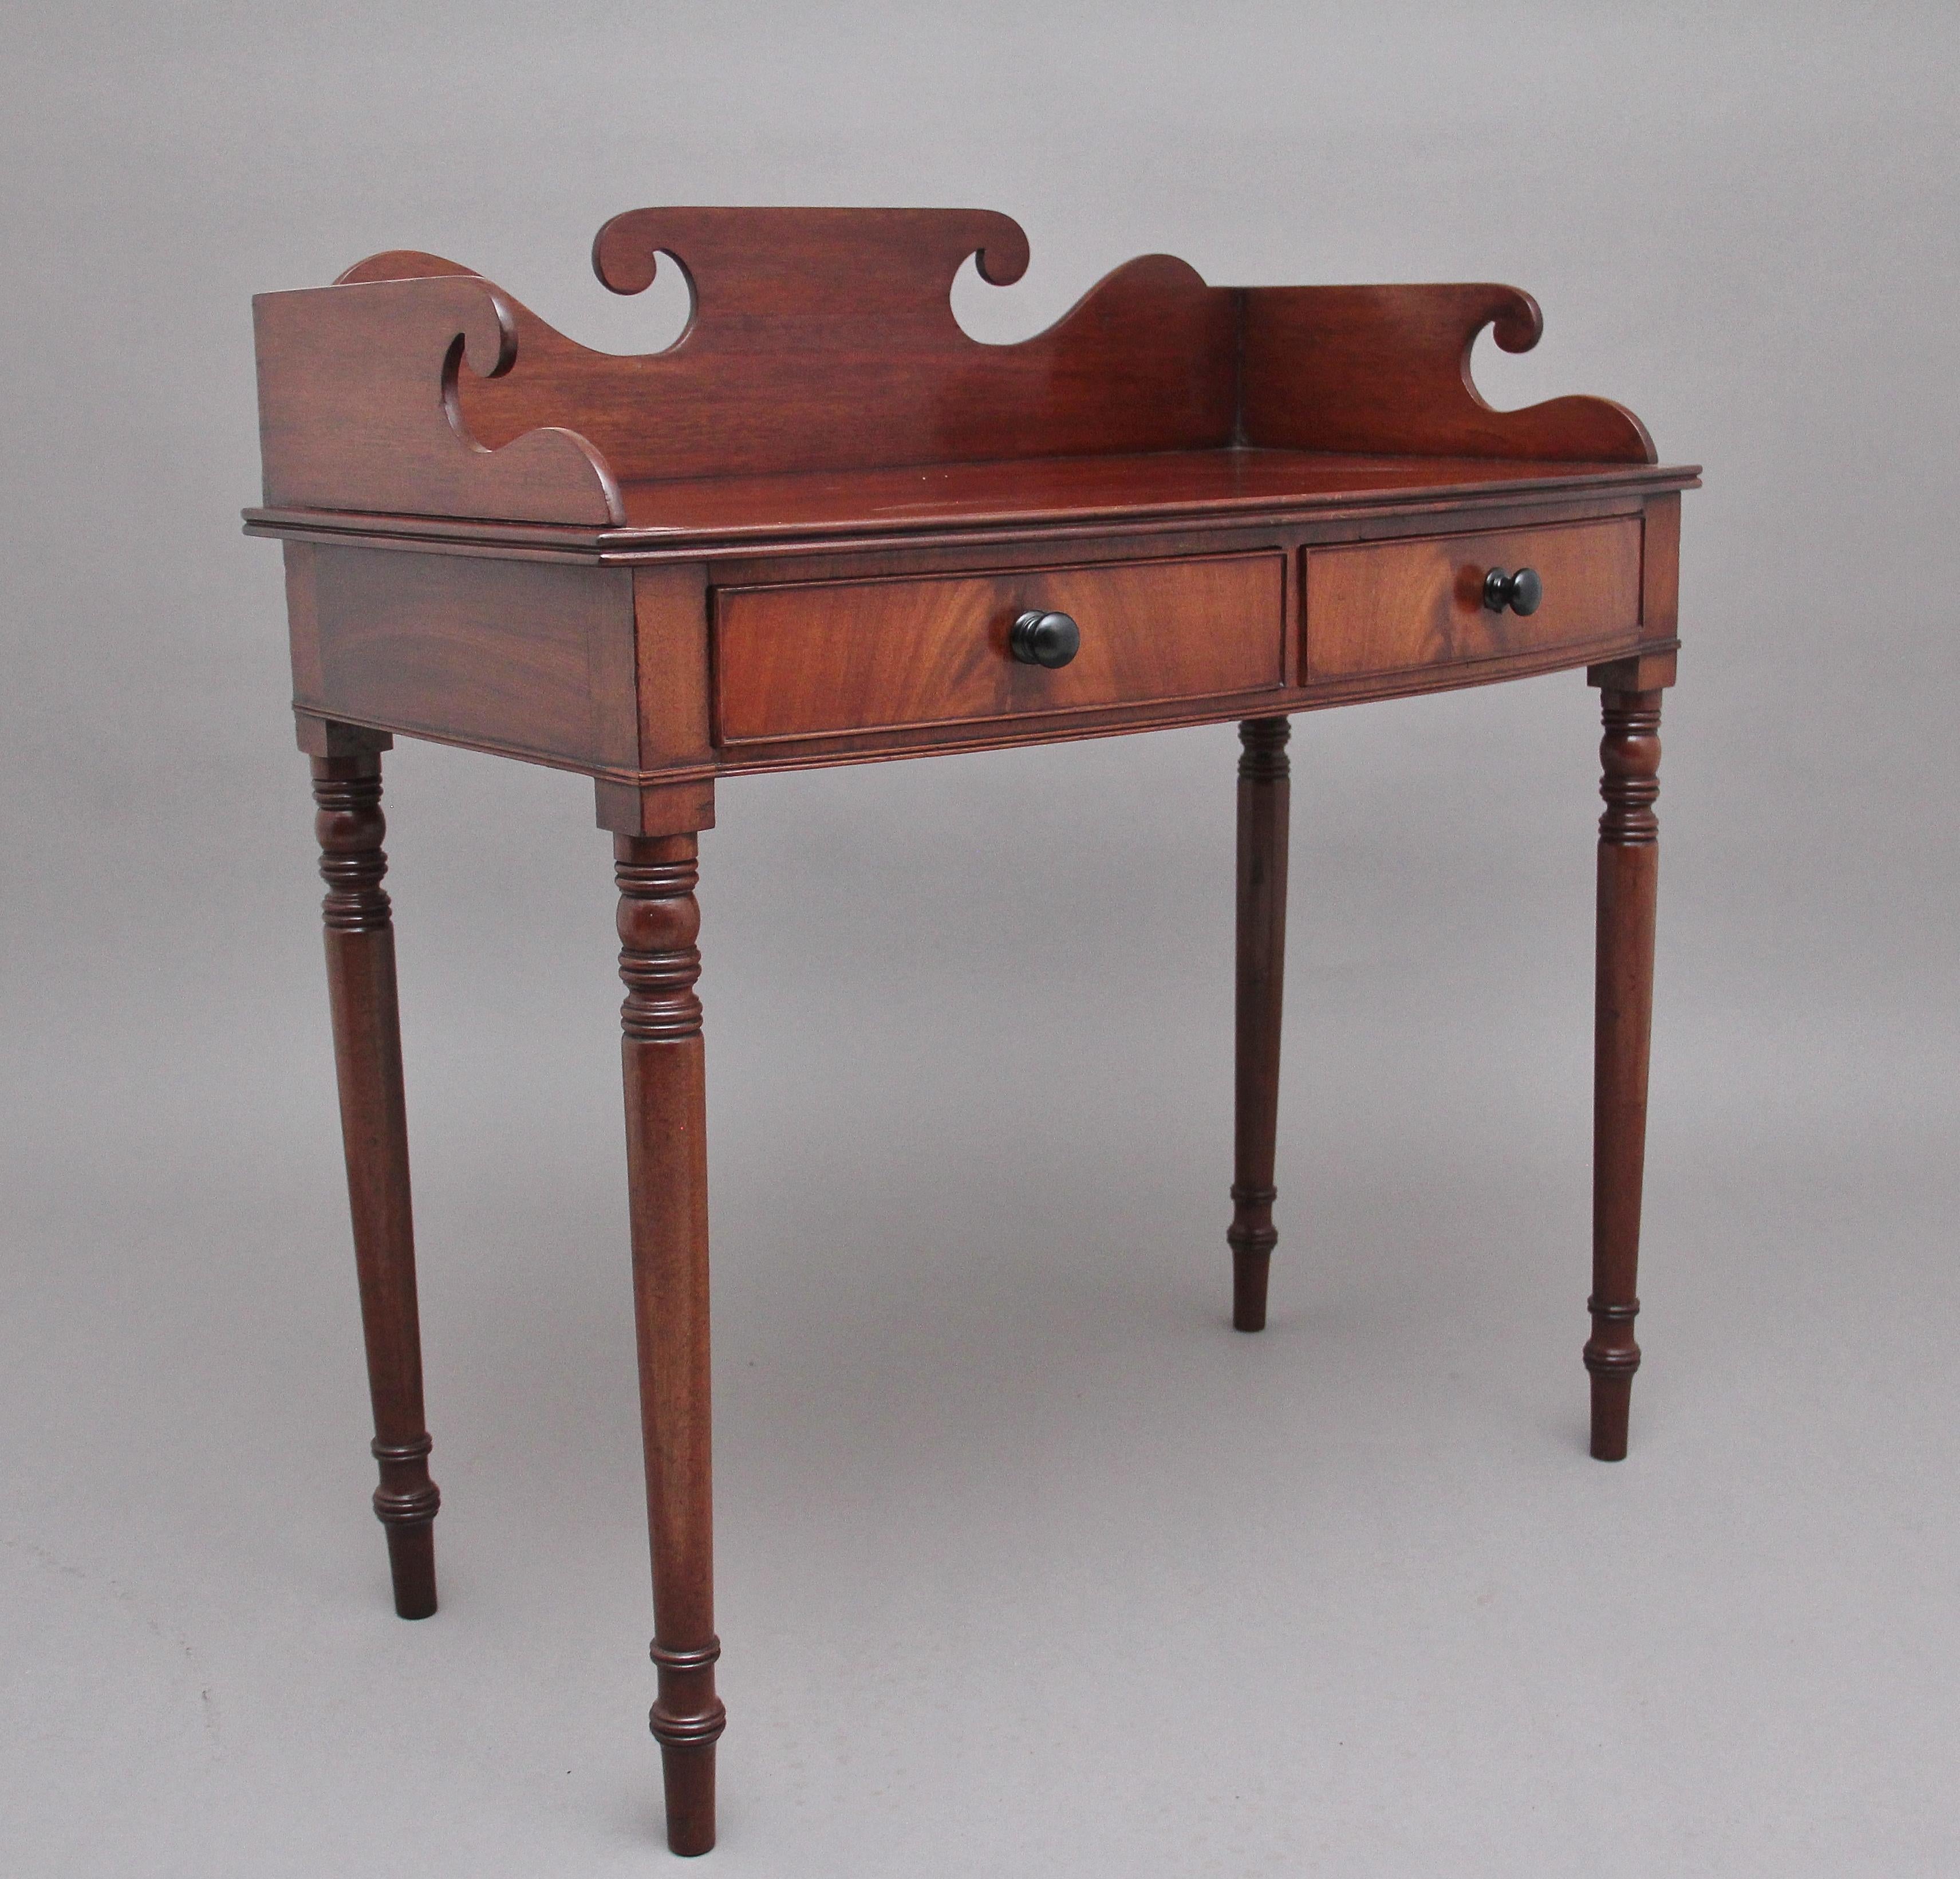 19th Century mahogany dressing / side table, having a decorative shaped frieze and nice figured top above two drawers with the original ebonised turned wooden knob handles, standing on four elegant turned legs. Circa 1840.